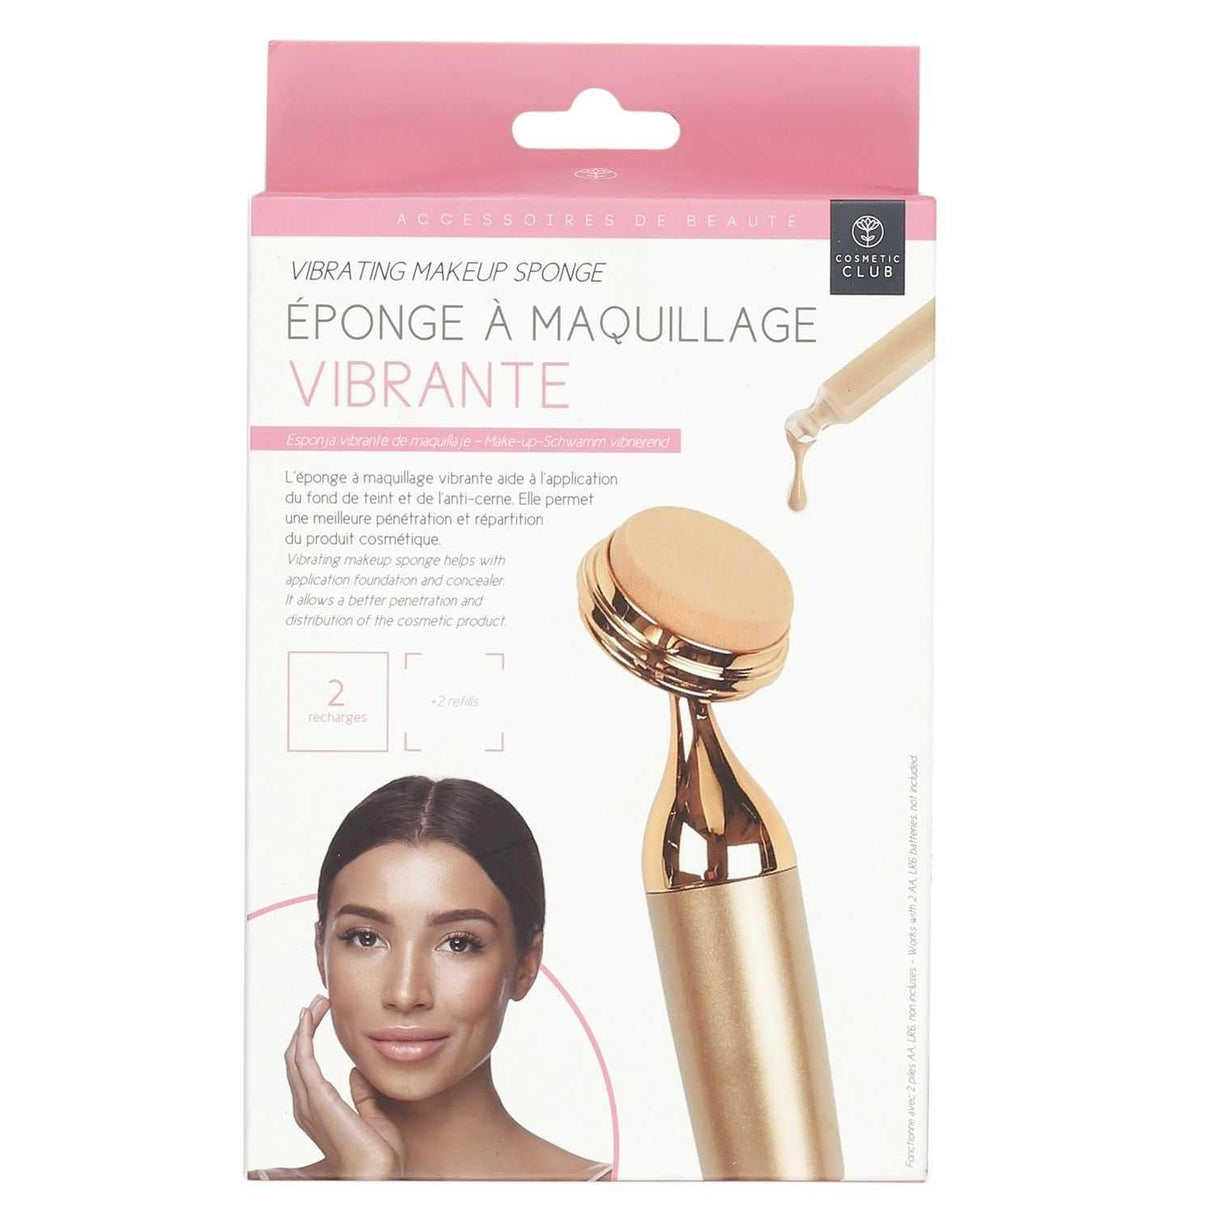 COSMETIC CLUB - EPONGE A MAQUILLAGE VIBRANTE ET 4 RECHARGES - STOCK4U GROUP